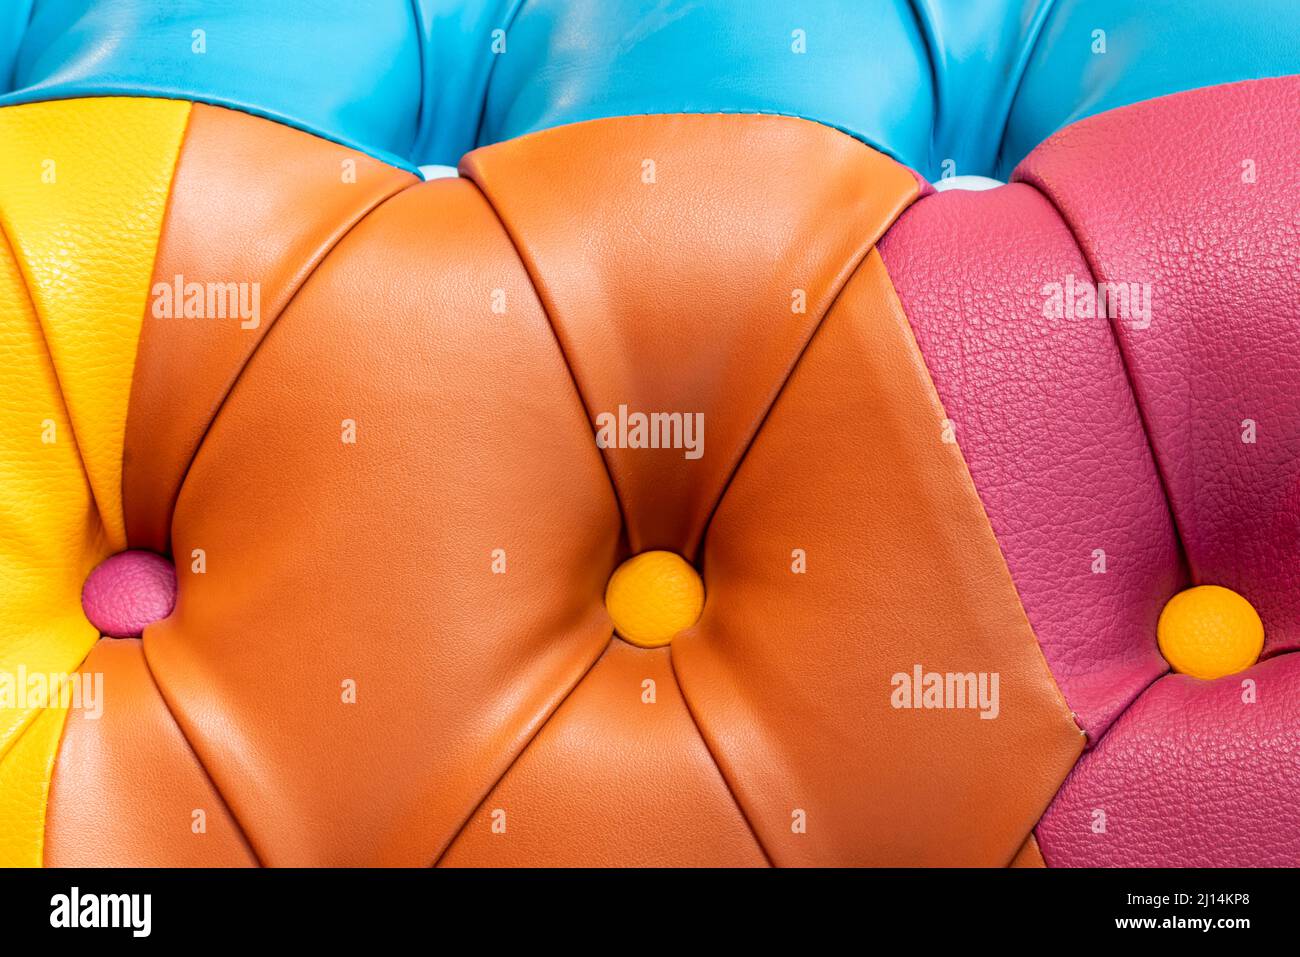 Multicolor leather texture with buttons. Leather upholstery pattern with buttons Stock Photo